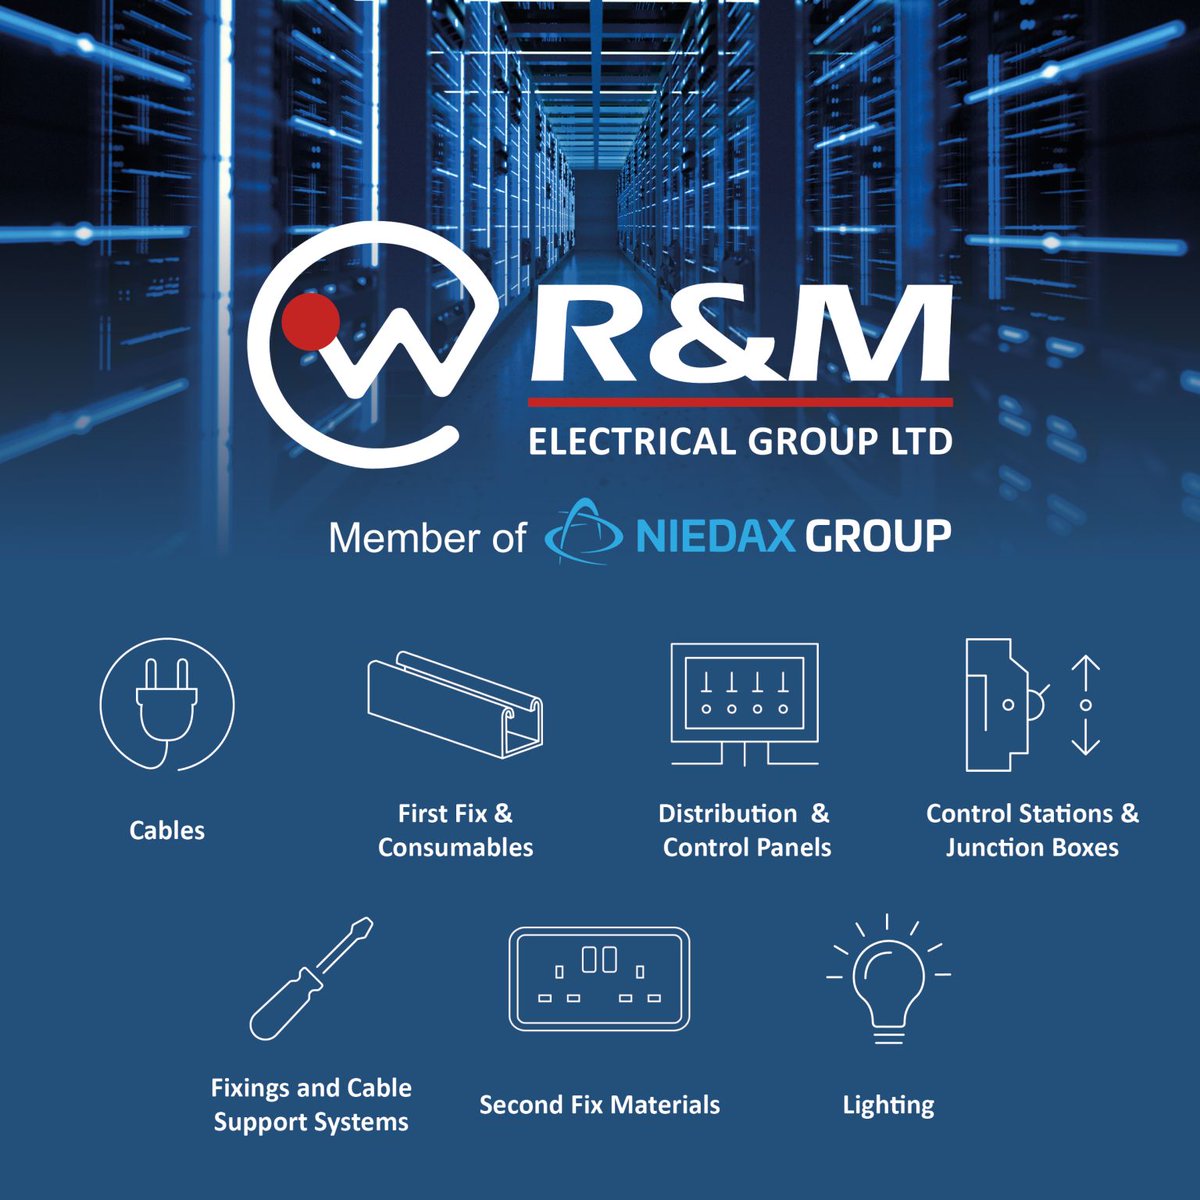 Power, specifically in the form of electricity, is fundamental to the successful running of #datacentres.  The variety of electrical products required to support this is vast. That’s where we come in. At R&M we can deliver #datacentre #electrical needs, from start to finish.